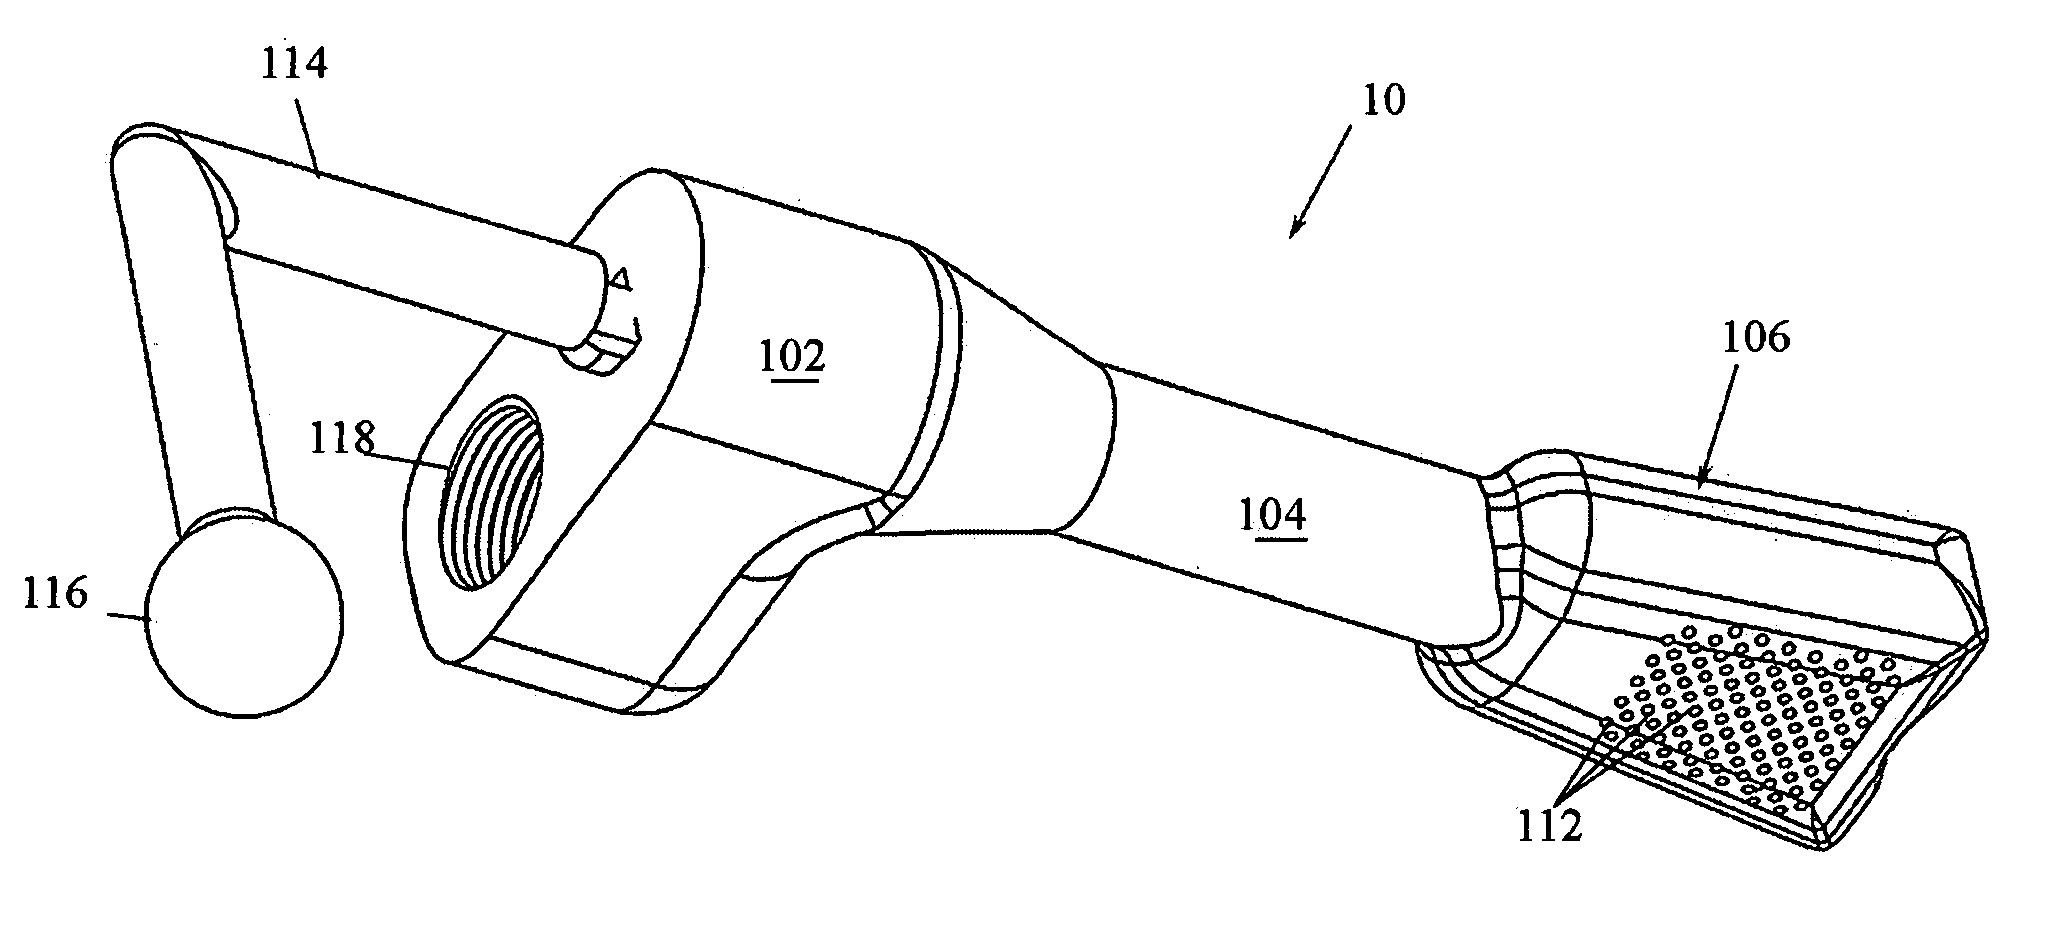 Endoscopic mesh delivery system with integral mesh stabilizer and vaginal probe